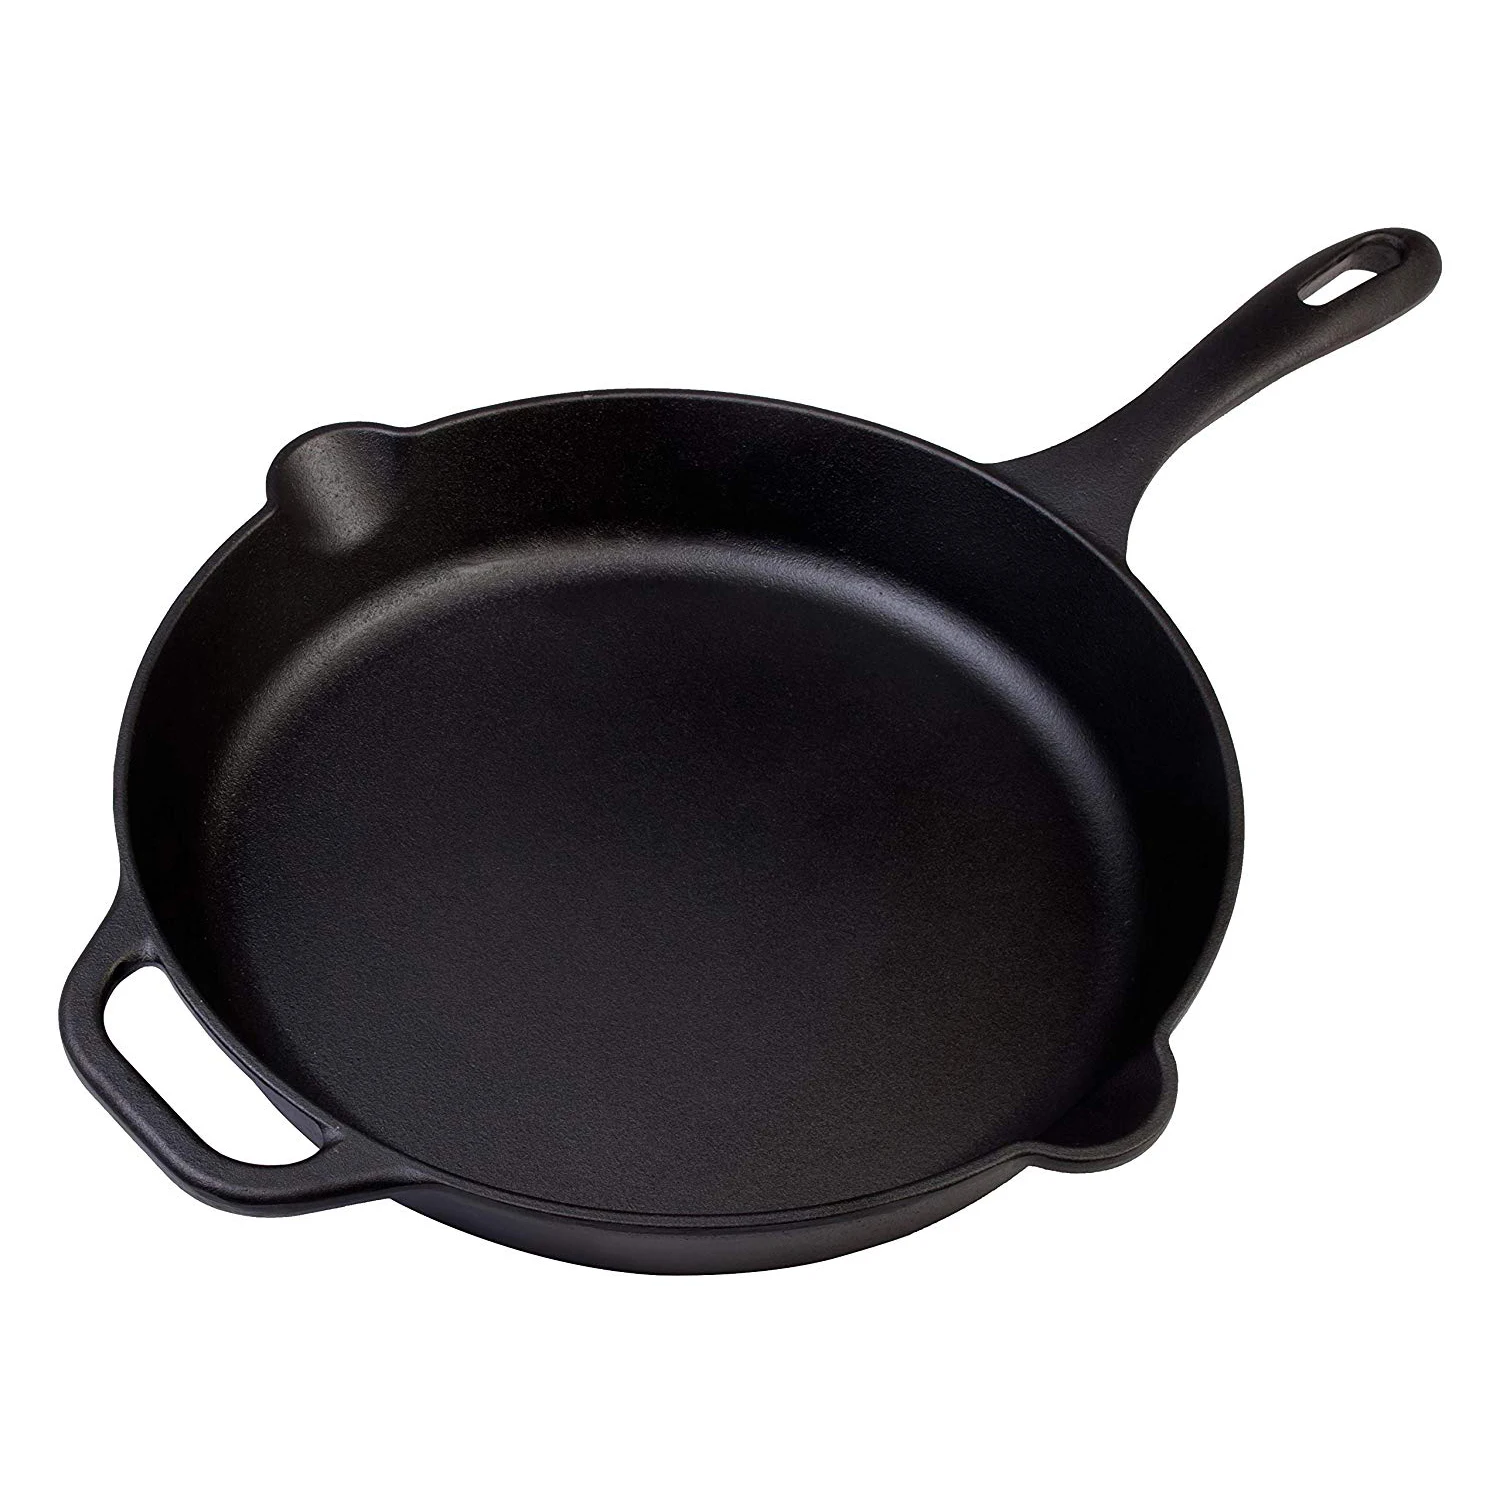 Details about   Food & Wine For Gaorham Light Cast Iron 12 Inch Skillet w/ Helper Handle White 